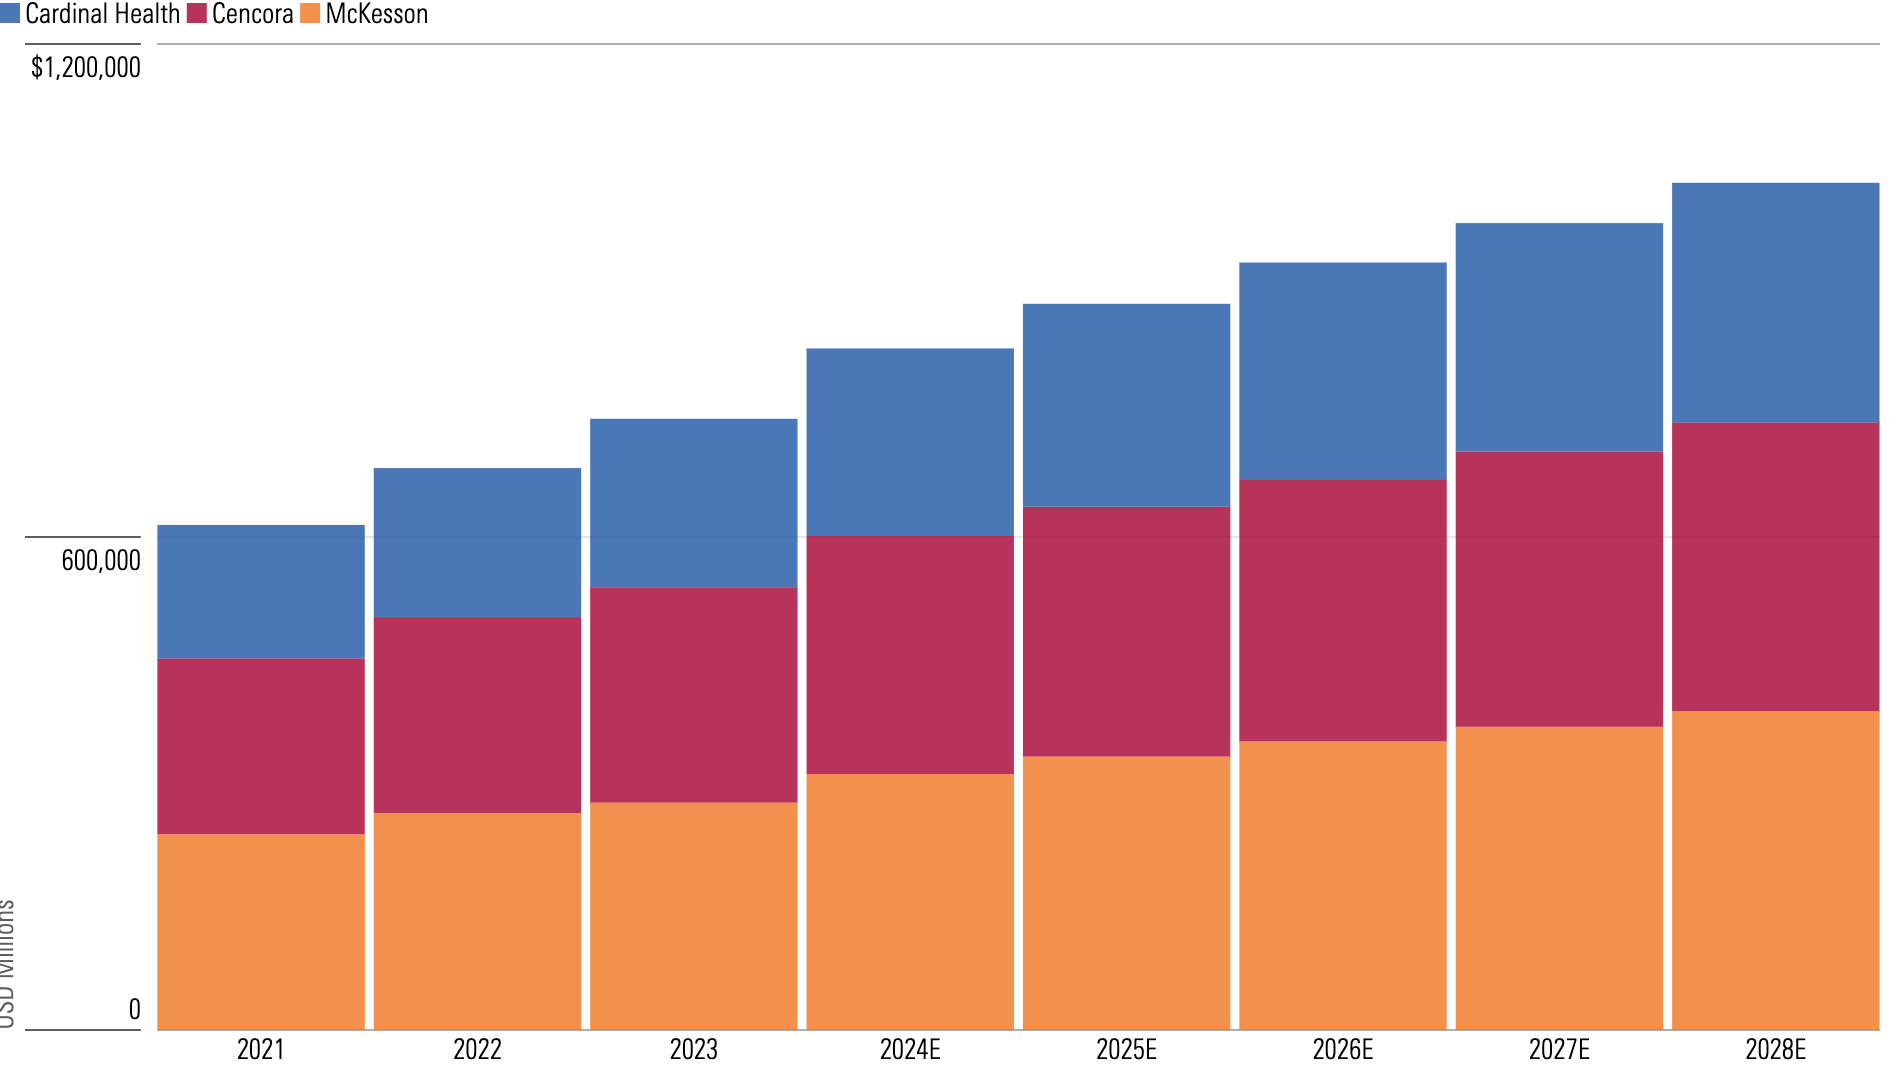 Bar chart showing combined sales and forecasts for combined sales for Cardinal Health, Cencora, and McKesson between 2021 and 2028.